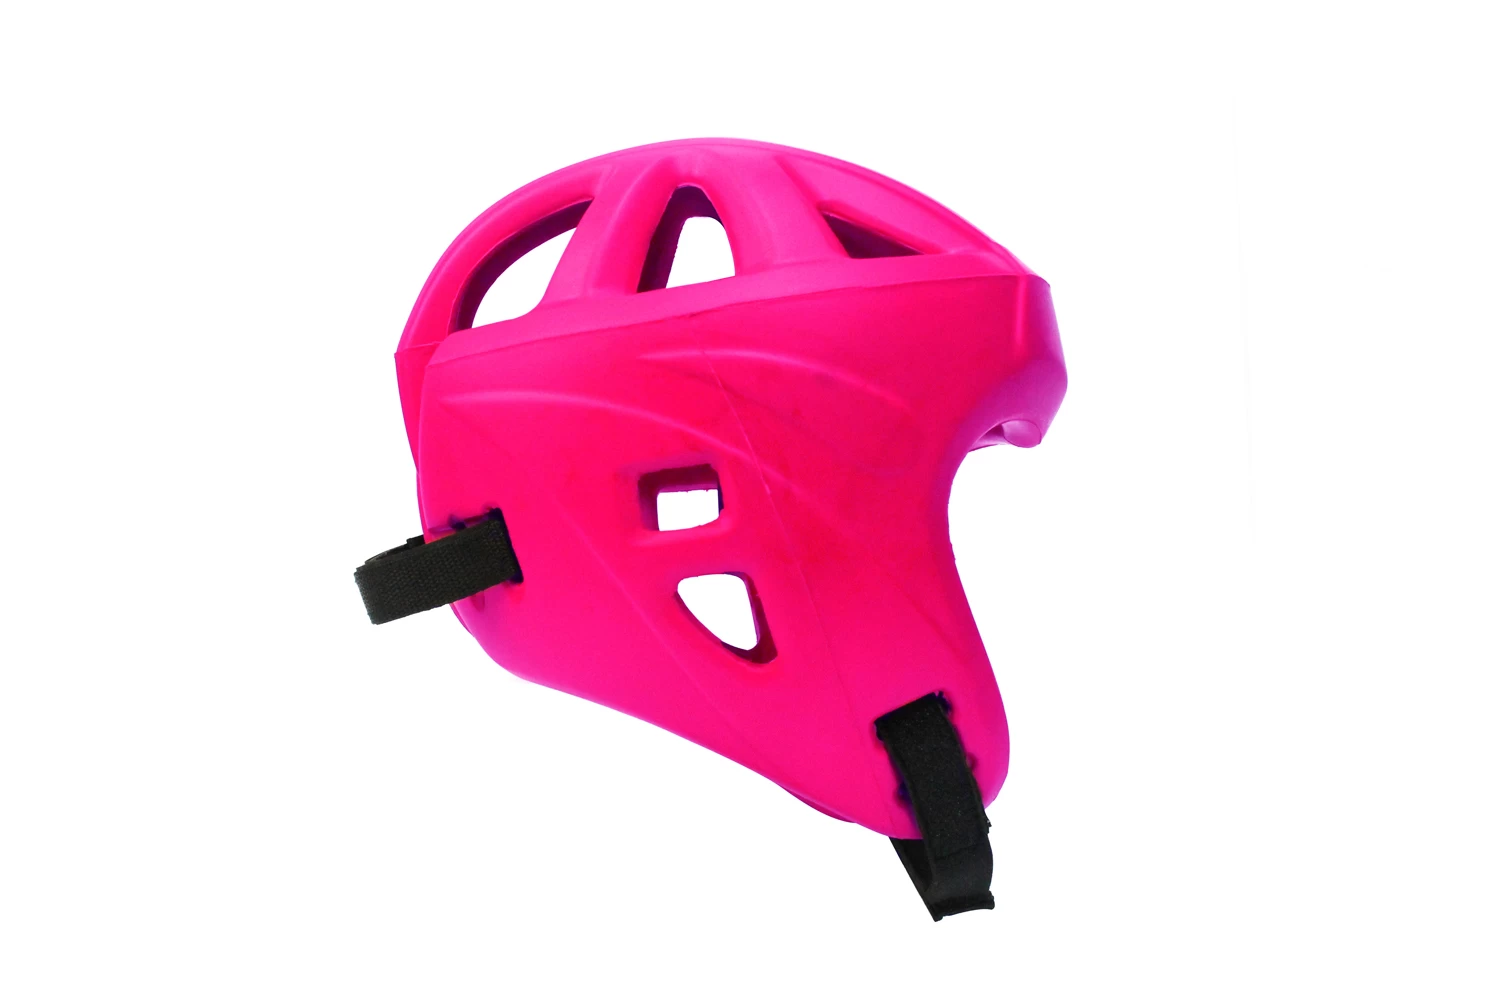 China PU Polyurethane professional safety helmet supplier China head gear for boxing factory China helmet manufacturer